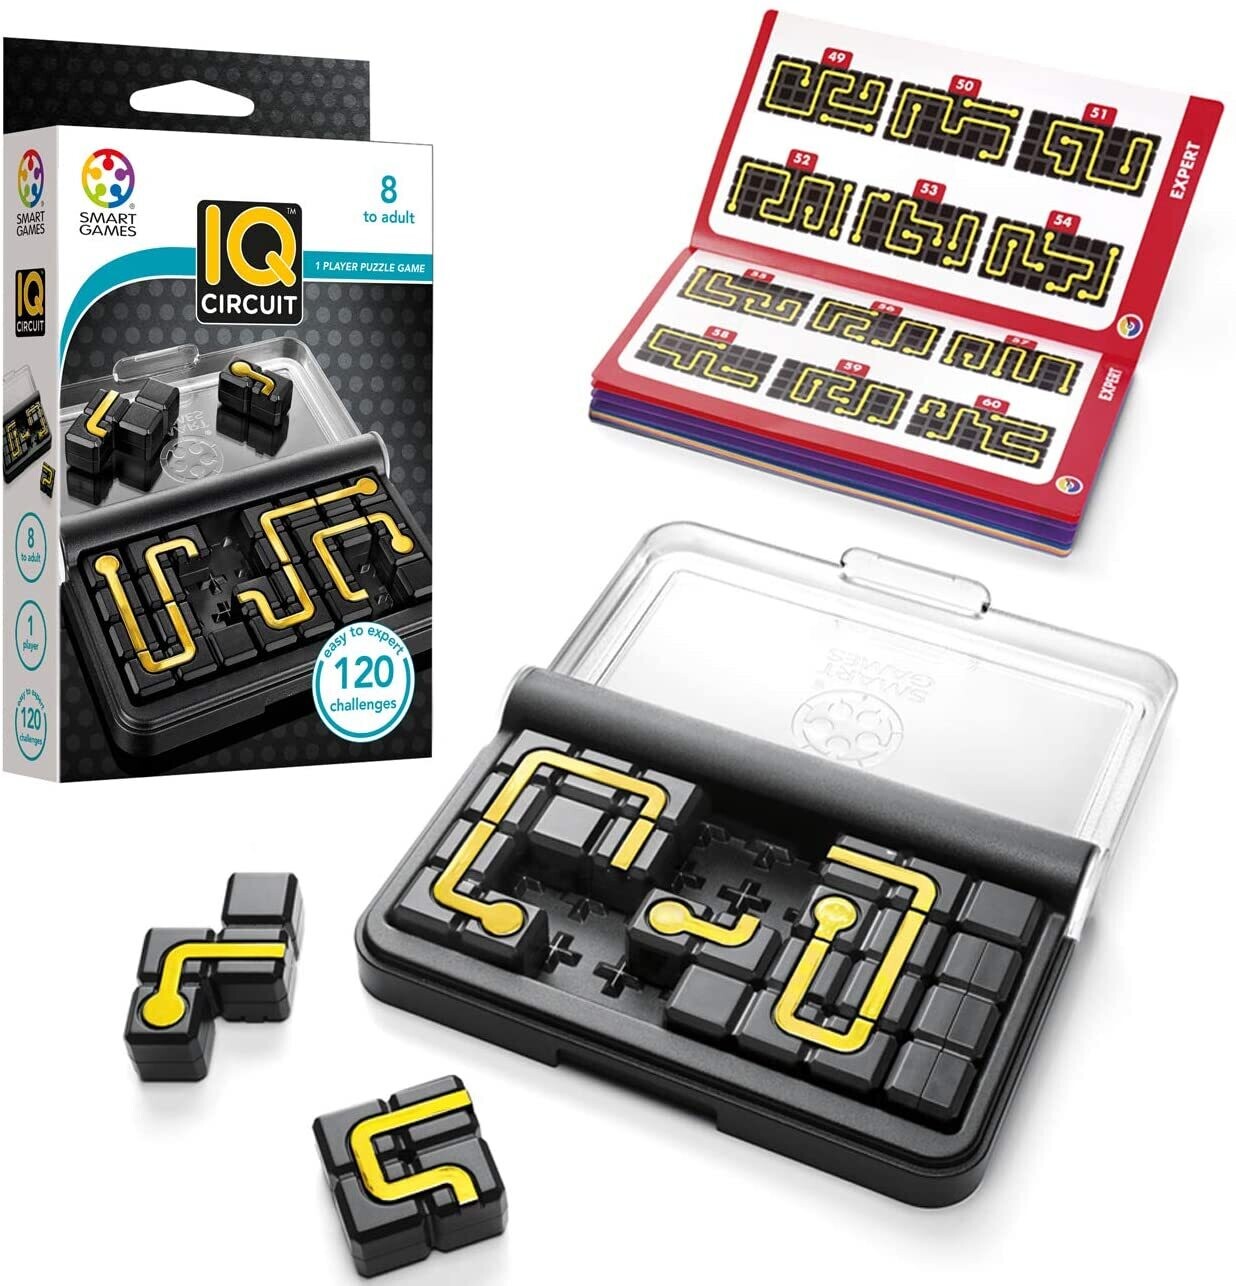 Smart Games IQ Circuit Logic Travel Game (for ages 8+)